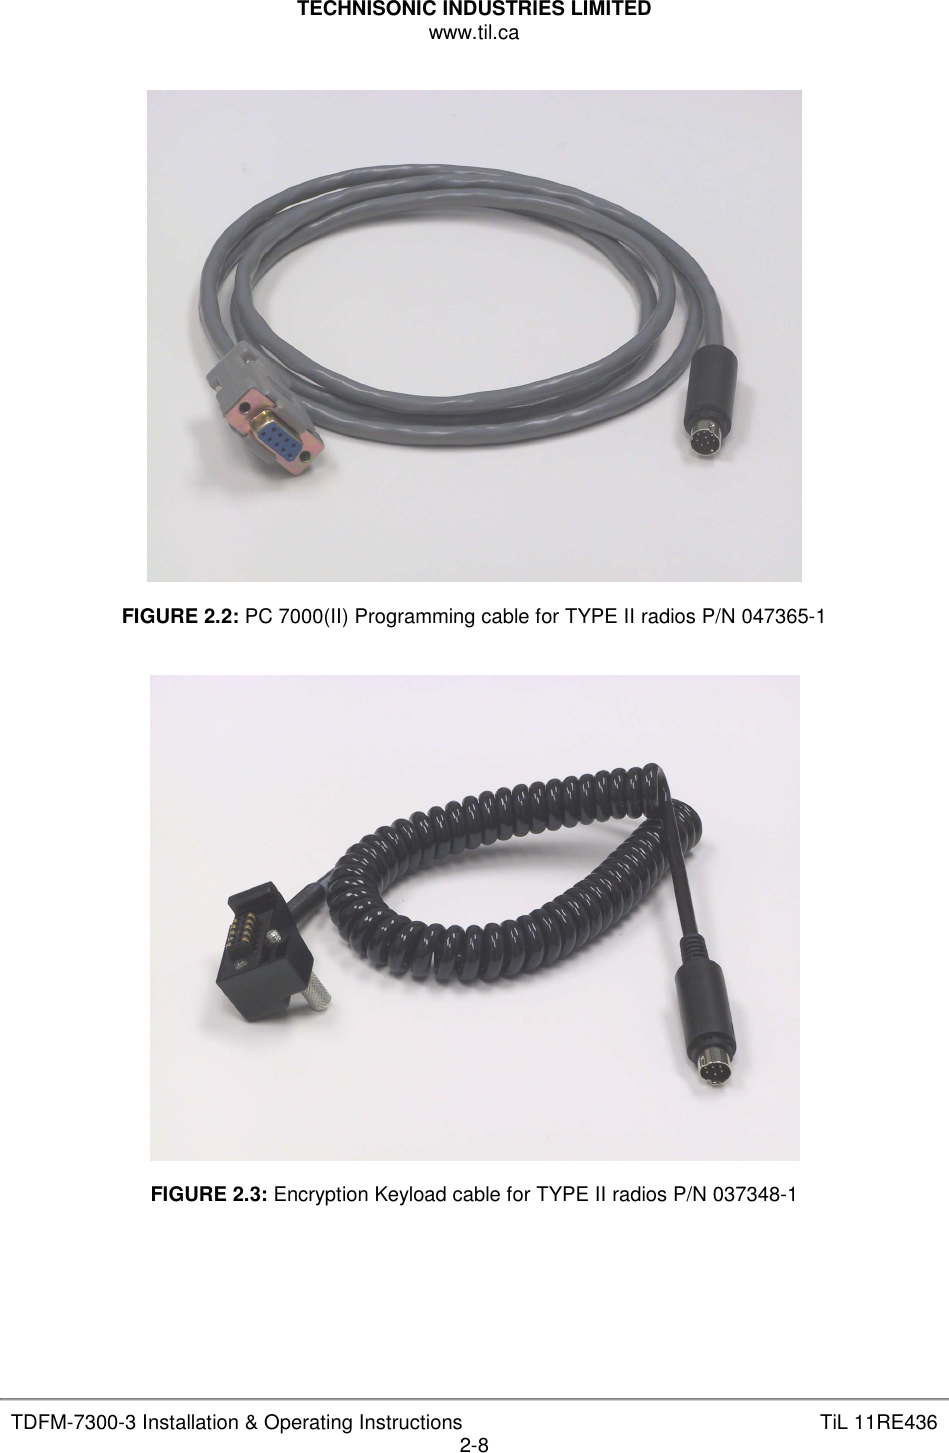 TECHNISONIC INDUSTRIES LIMITED www.til.ca   TDFM-7300-3 Installation &amp; Operating Instructions  TiL 11RE436 2-8    FIGURE 2.2: PC 7000(II) Programming cable for TYPE II radios P/N 047365-1     FIGURE 2.3: Encryption Keyload cable for TYPE II radios P/N 037348-1       